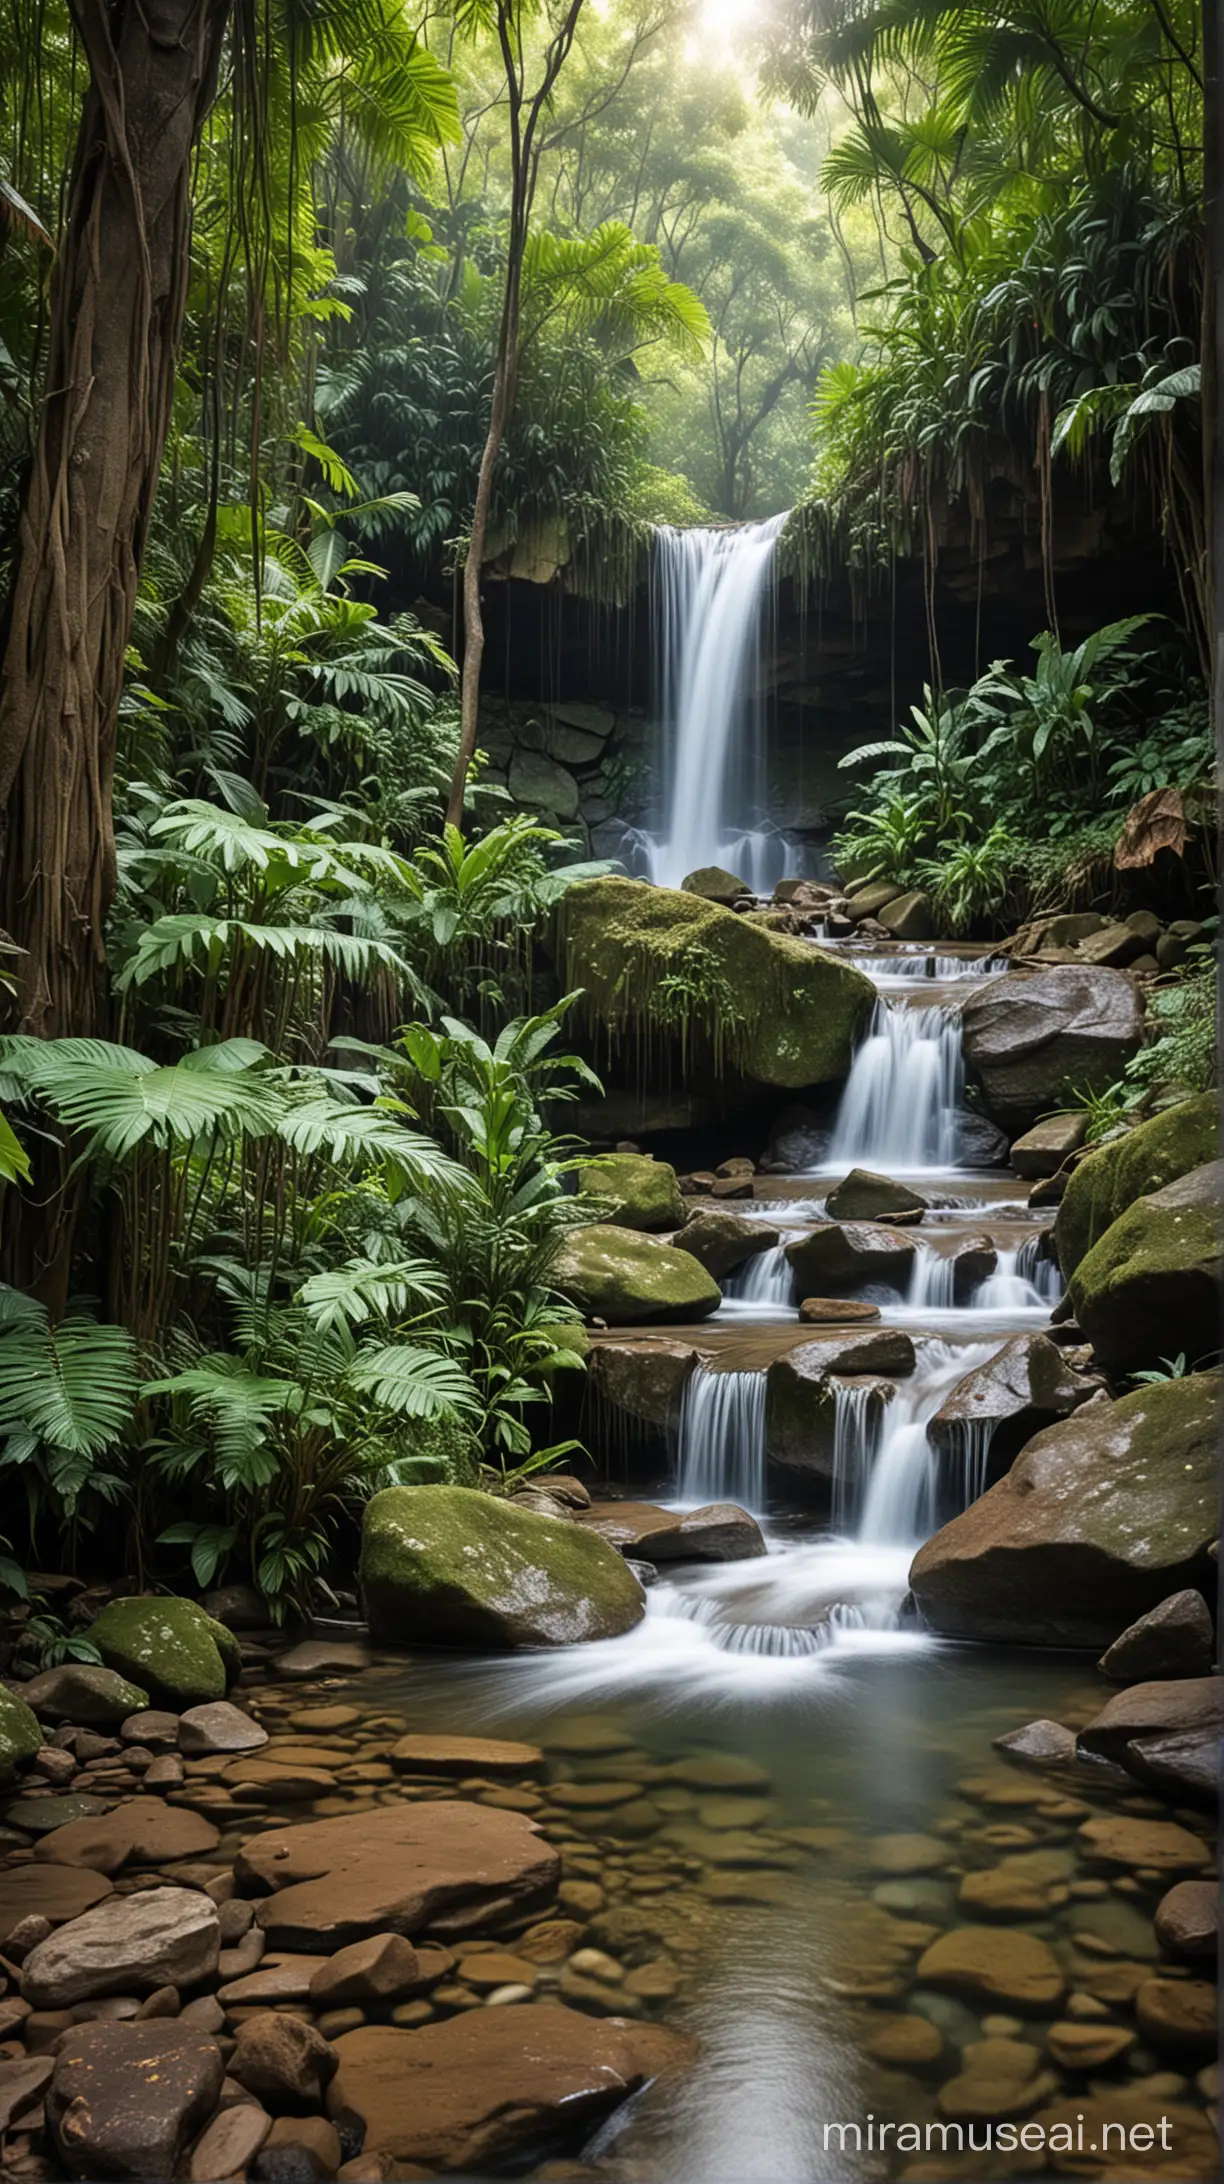 Small waterfalls in a beautiful tropical forest. The image is taken using Canon EOS 5D Mark IV with slow speed ahutter setting